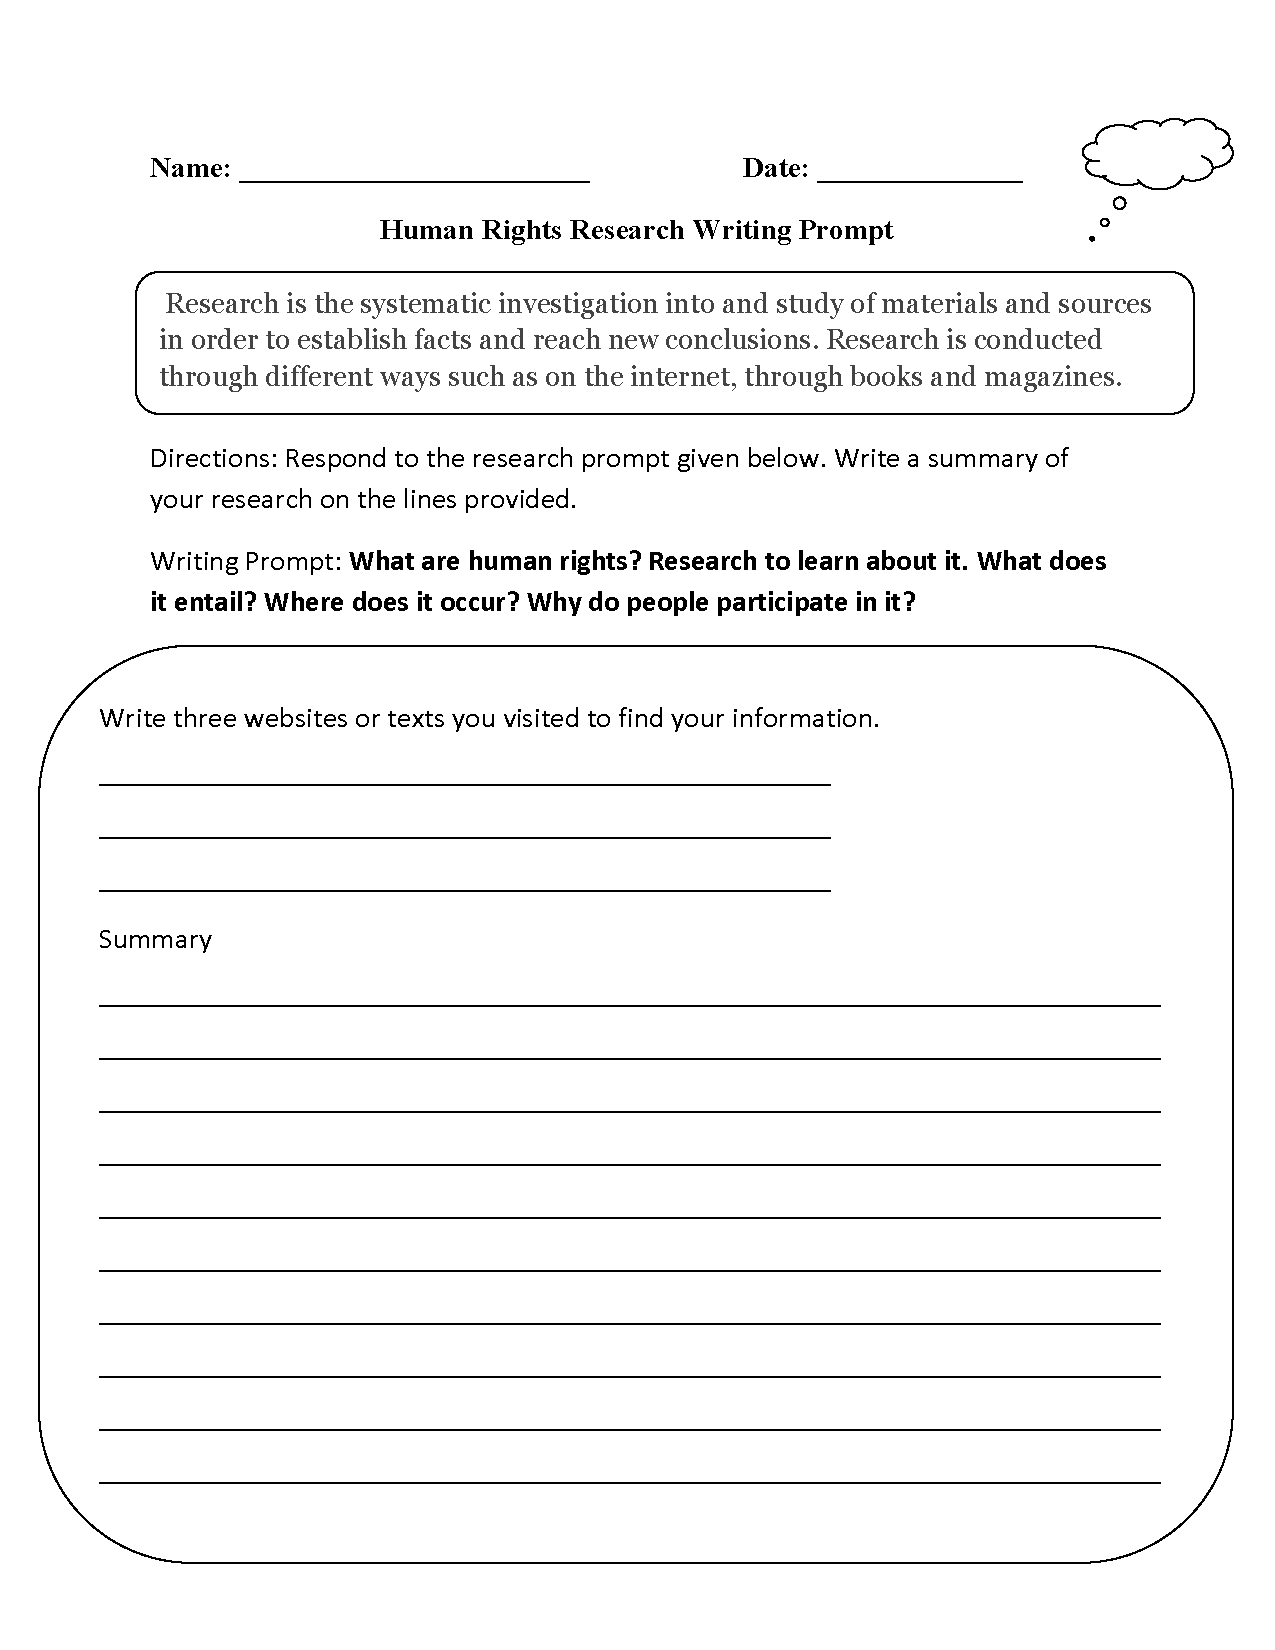 Human Rights Research Writing Prompts Worksheet